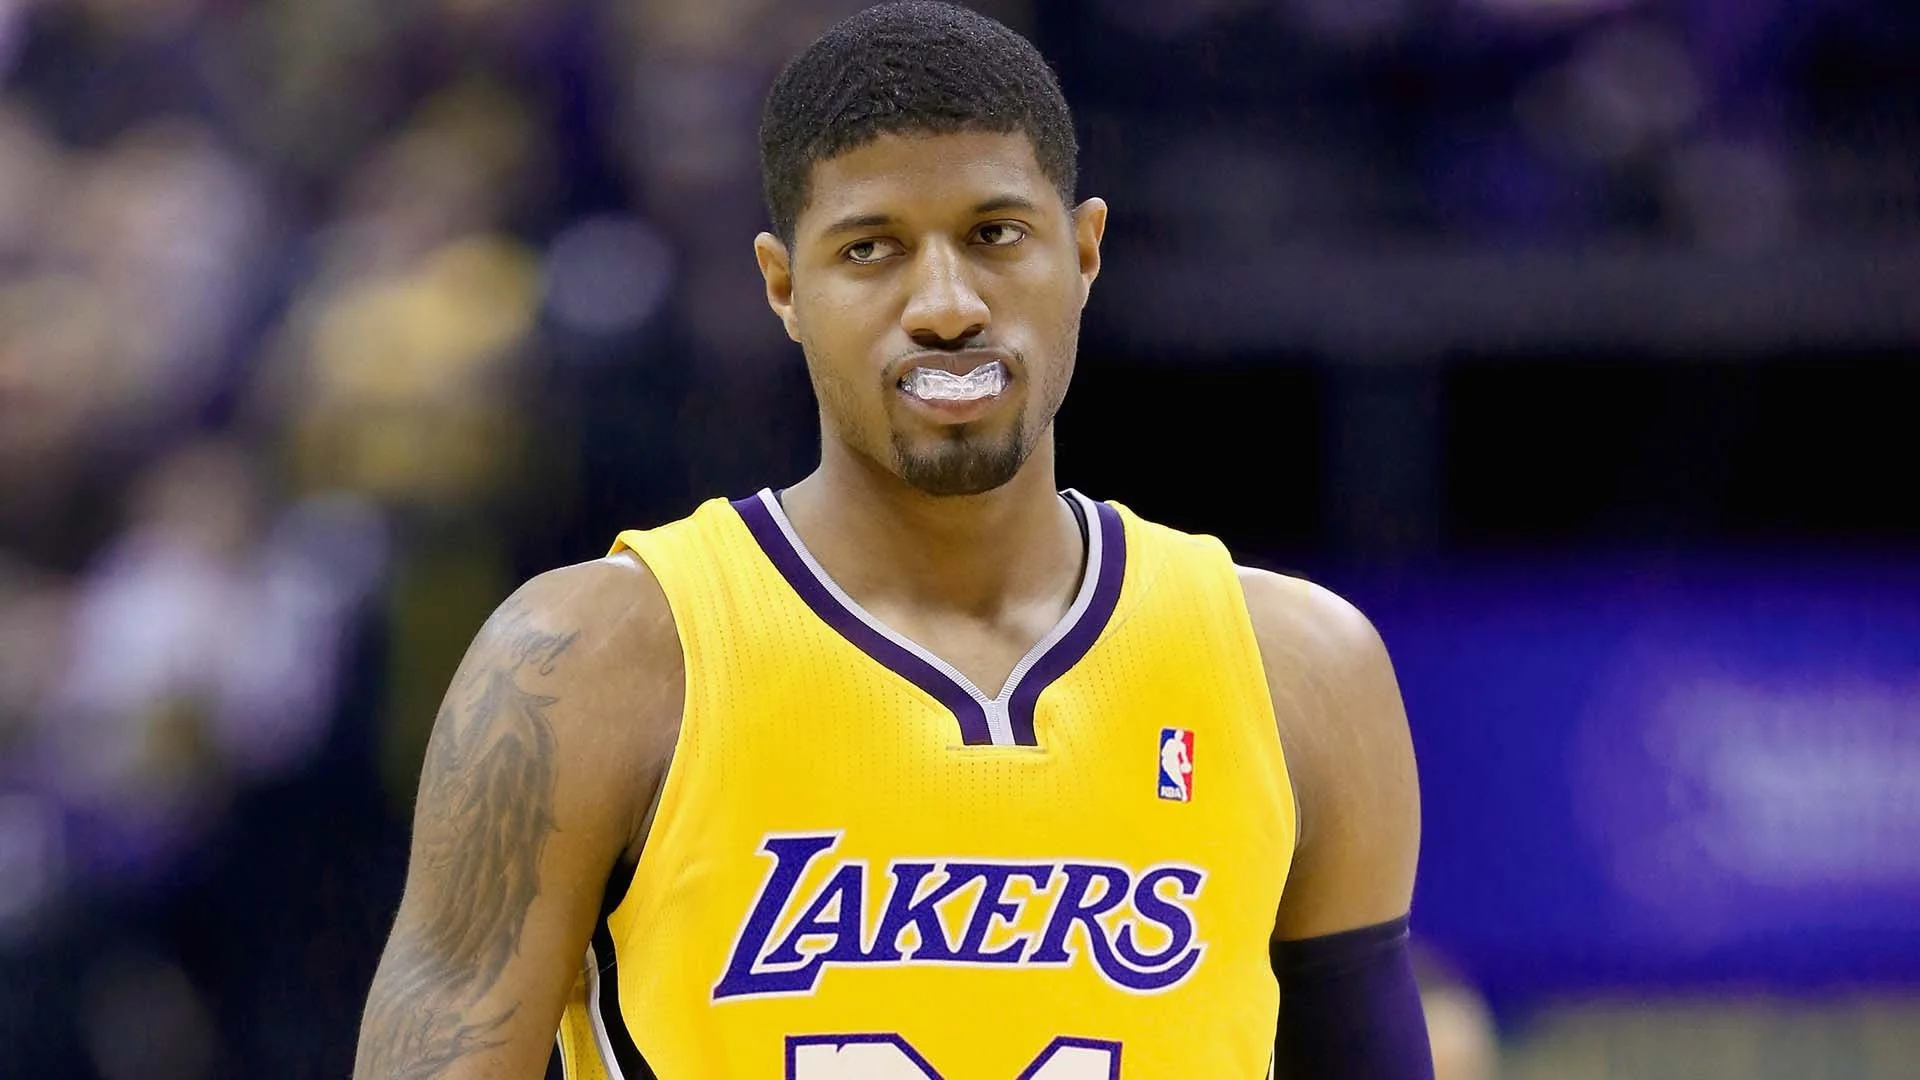 Paul George Still Plans To Play For The Lakers in 2018